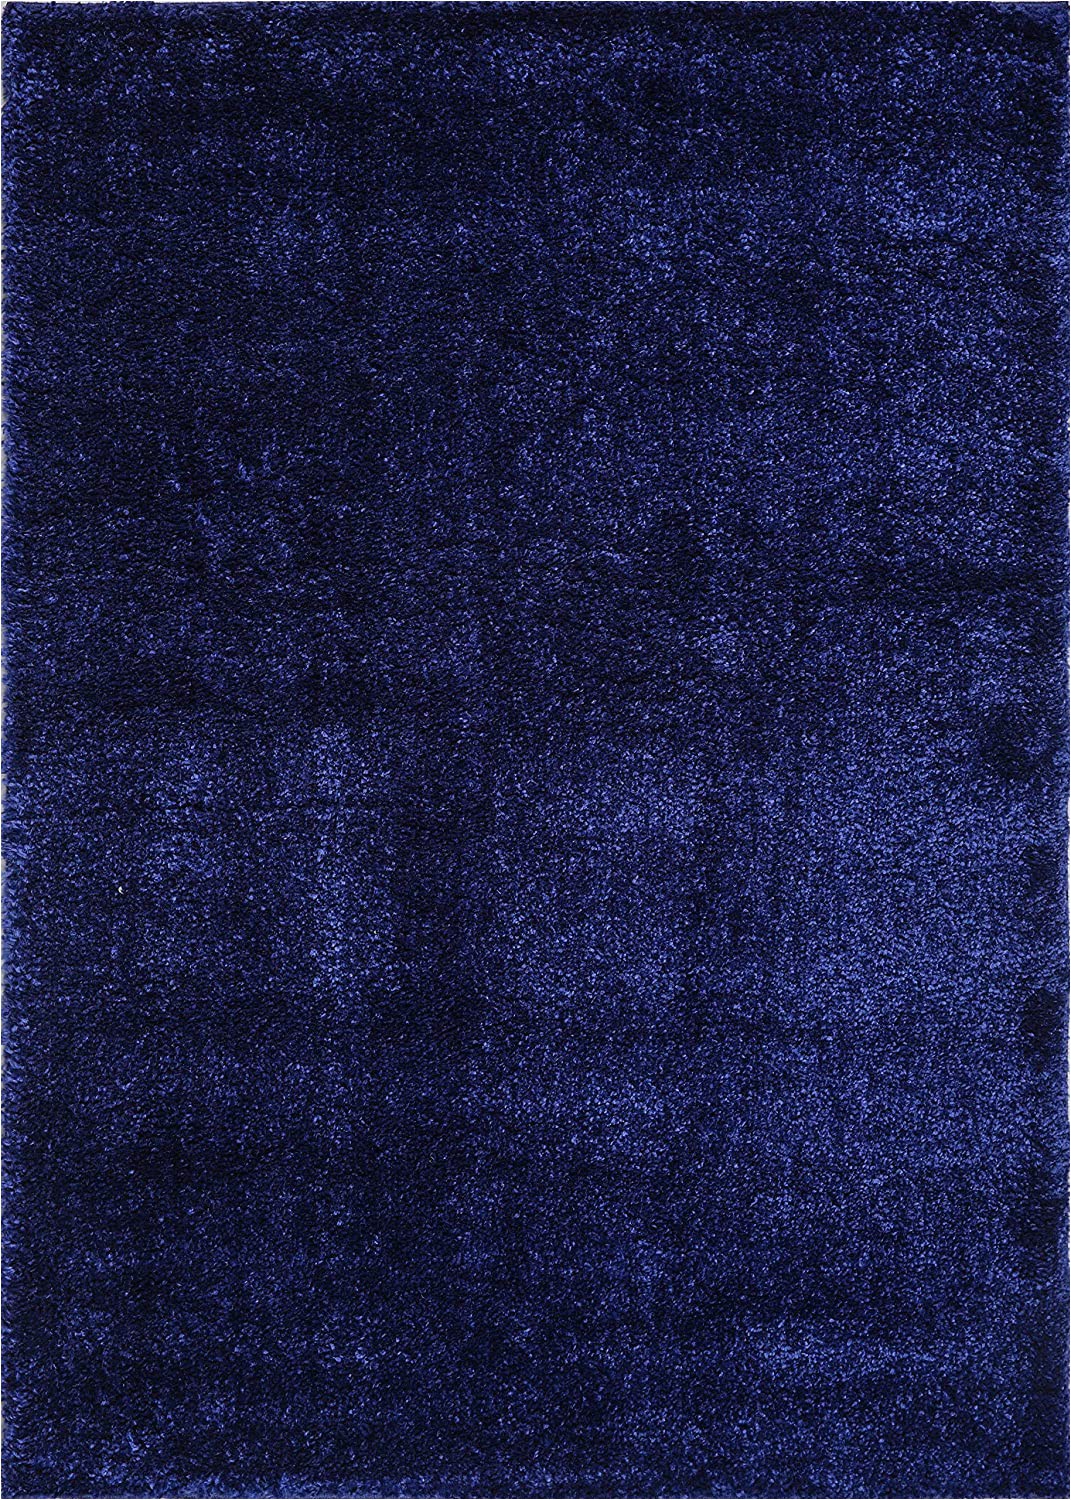 Plush Navy Blue Rug Ladole Rugs Shaggy soft Plush Smooth solid Plain Color Modern Durable area Rug Carpet for Living Room Bedroom In Navy Blue 5 3" X 7 6" 160cm X 230cm